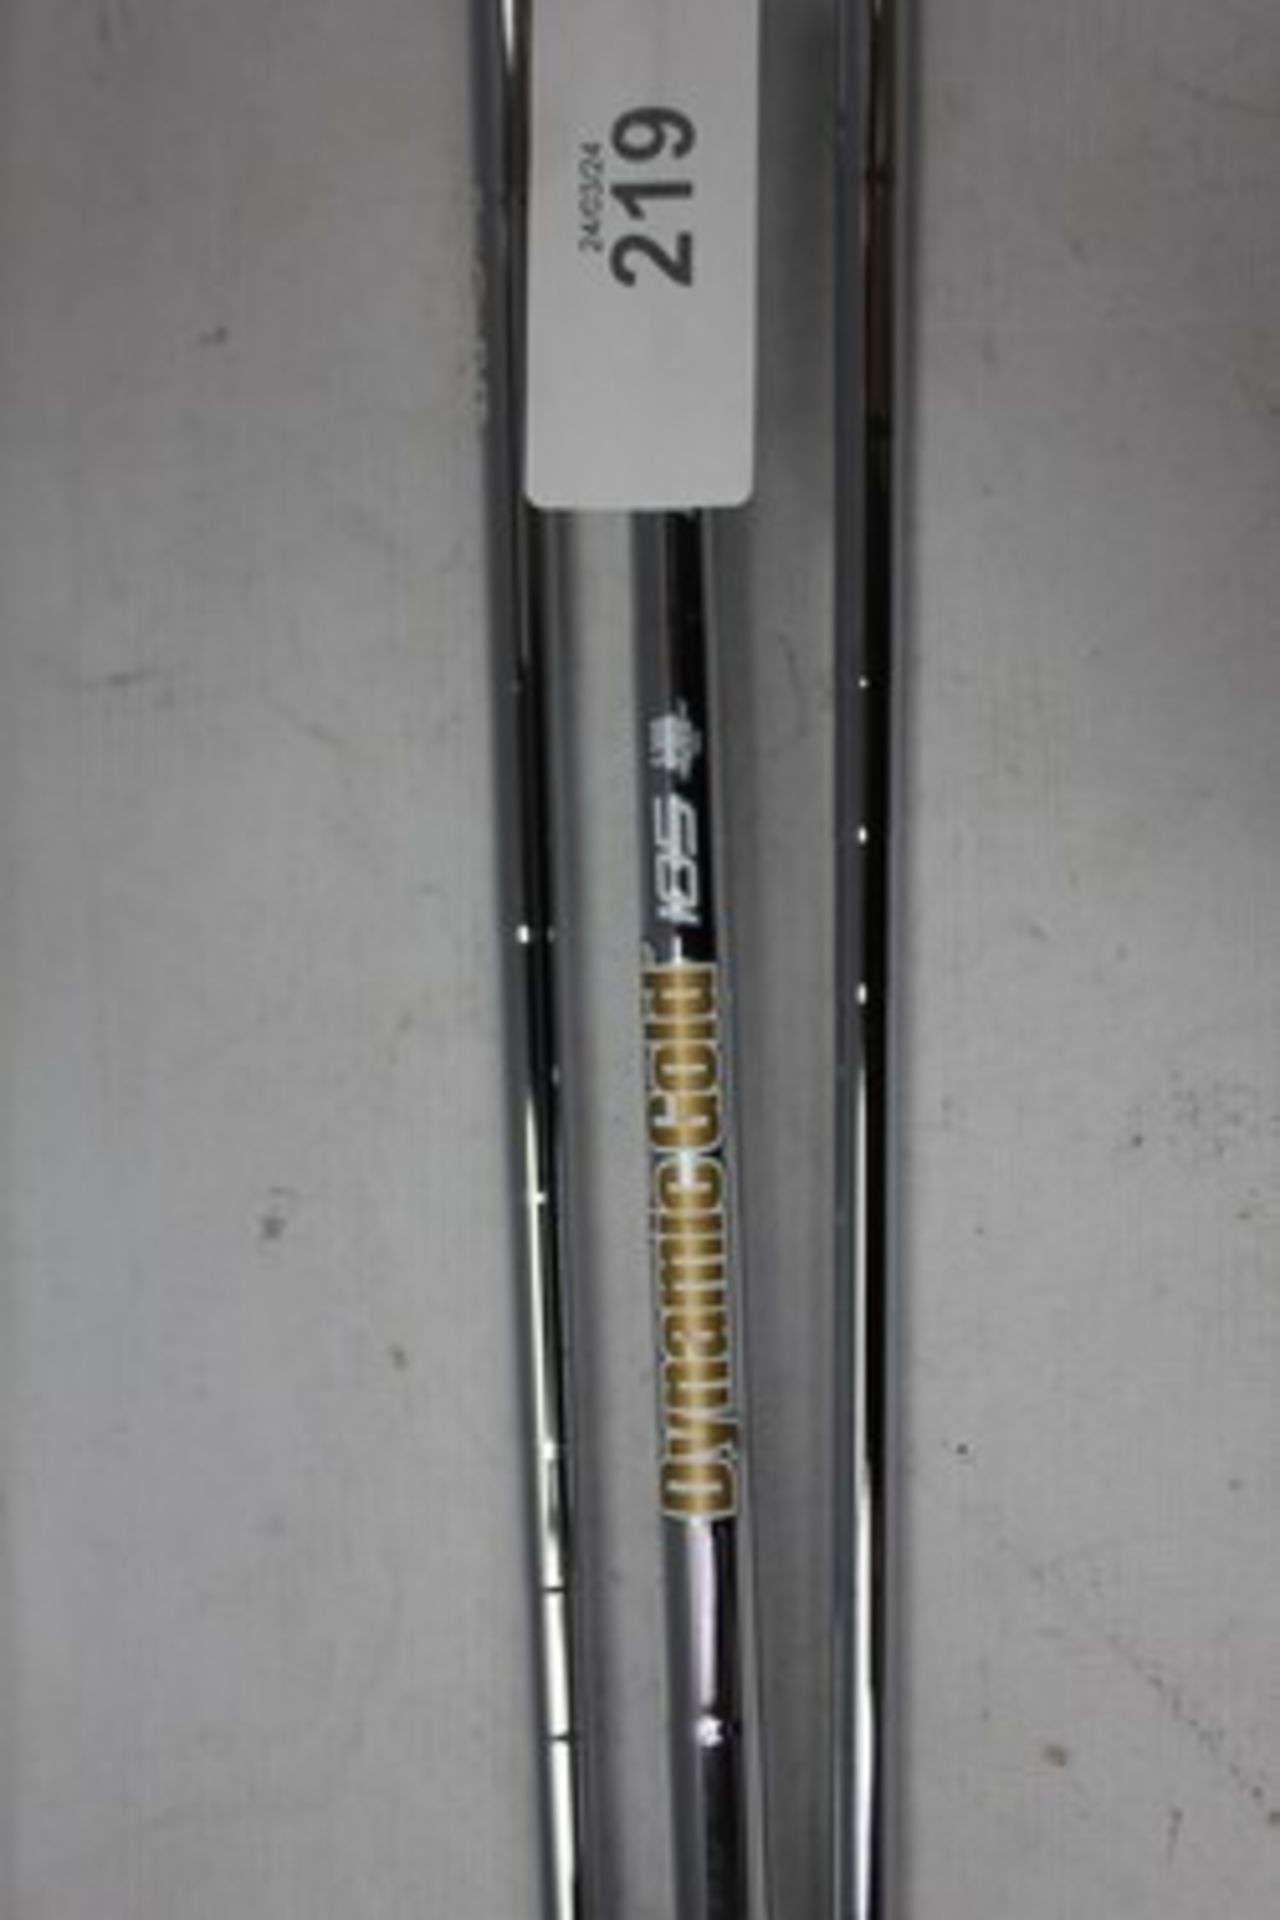 4 x TaylorMade Stealth golf clubs, No: 5, No. 6, No. 7 and No. 8 with dynamic gold 105 shaft, left- - Image 2 of 2